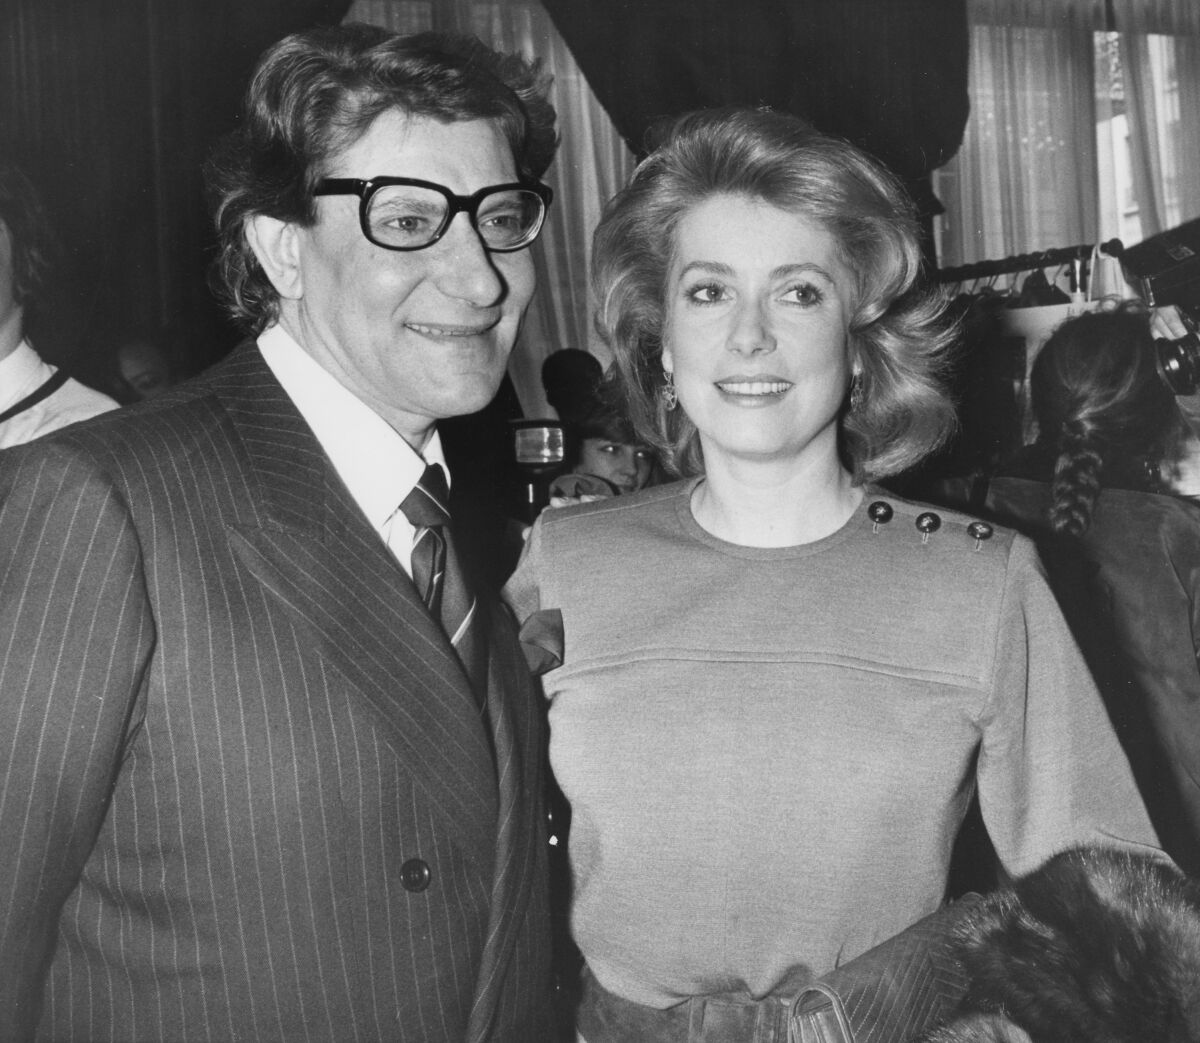 FILE - In this Jan. 30 1985 file photo, French actress Catherine Deneuve congratulates French fashion designer Yves Saint Laurent after the presentation of spring-summer haute couture collection in Paris. Denueve's family said in a statement released Wednesday Nov. 6, 2019, that the 76-year-old actress suffered a "very limited and therefore reversible" stroke. (AP Photo/Alexis Duclos, File)